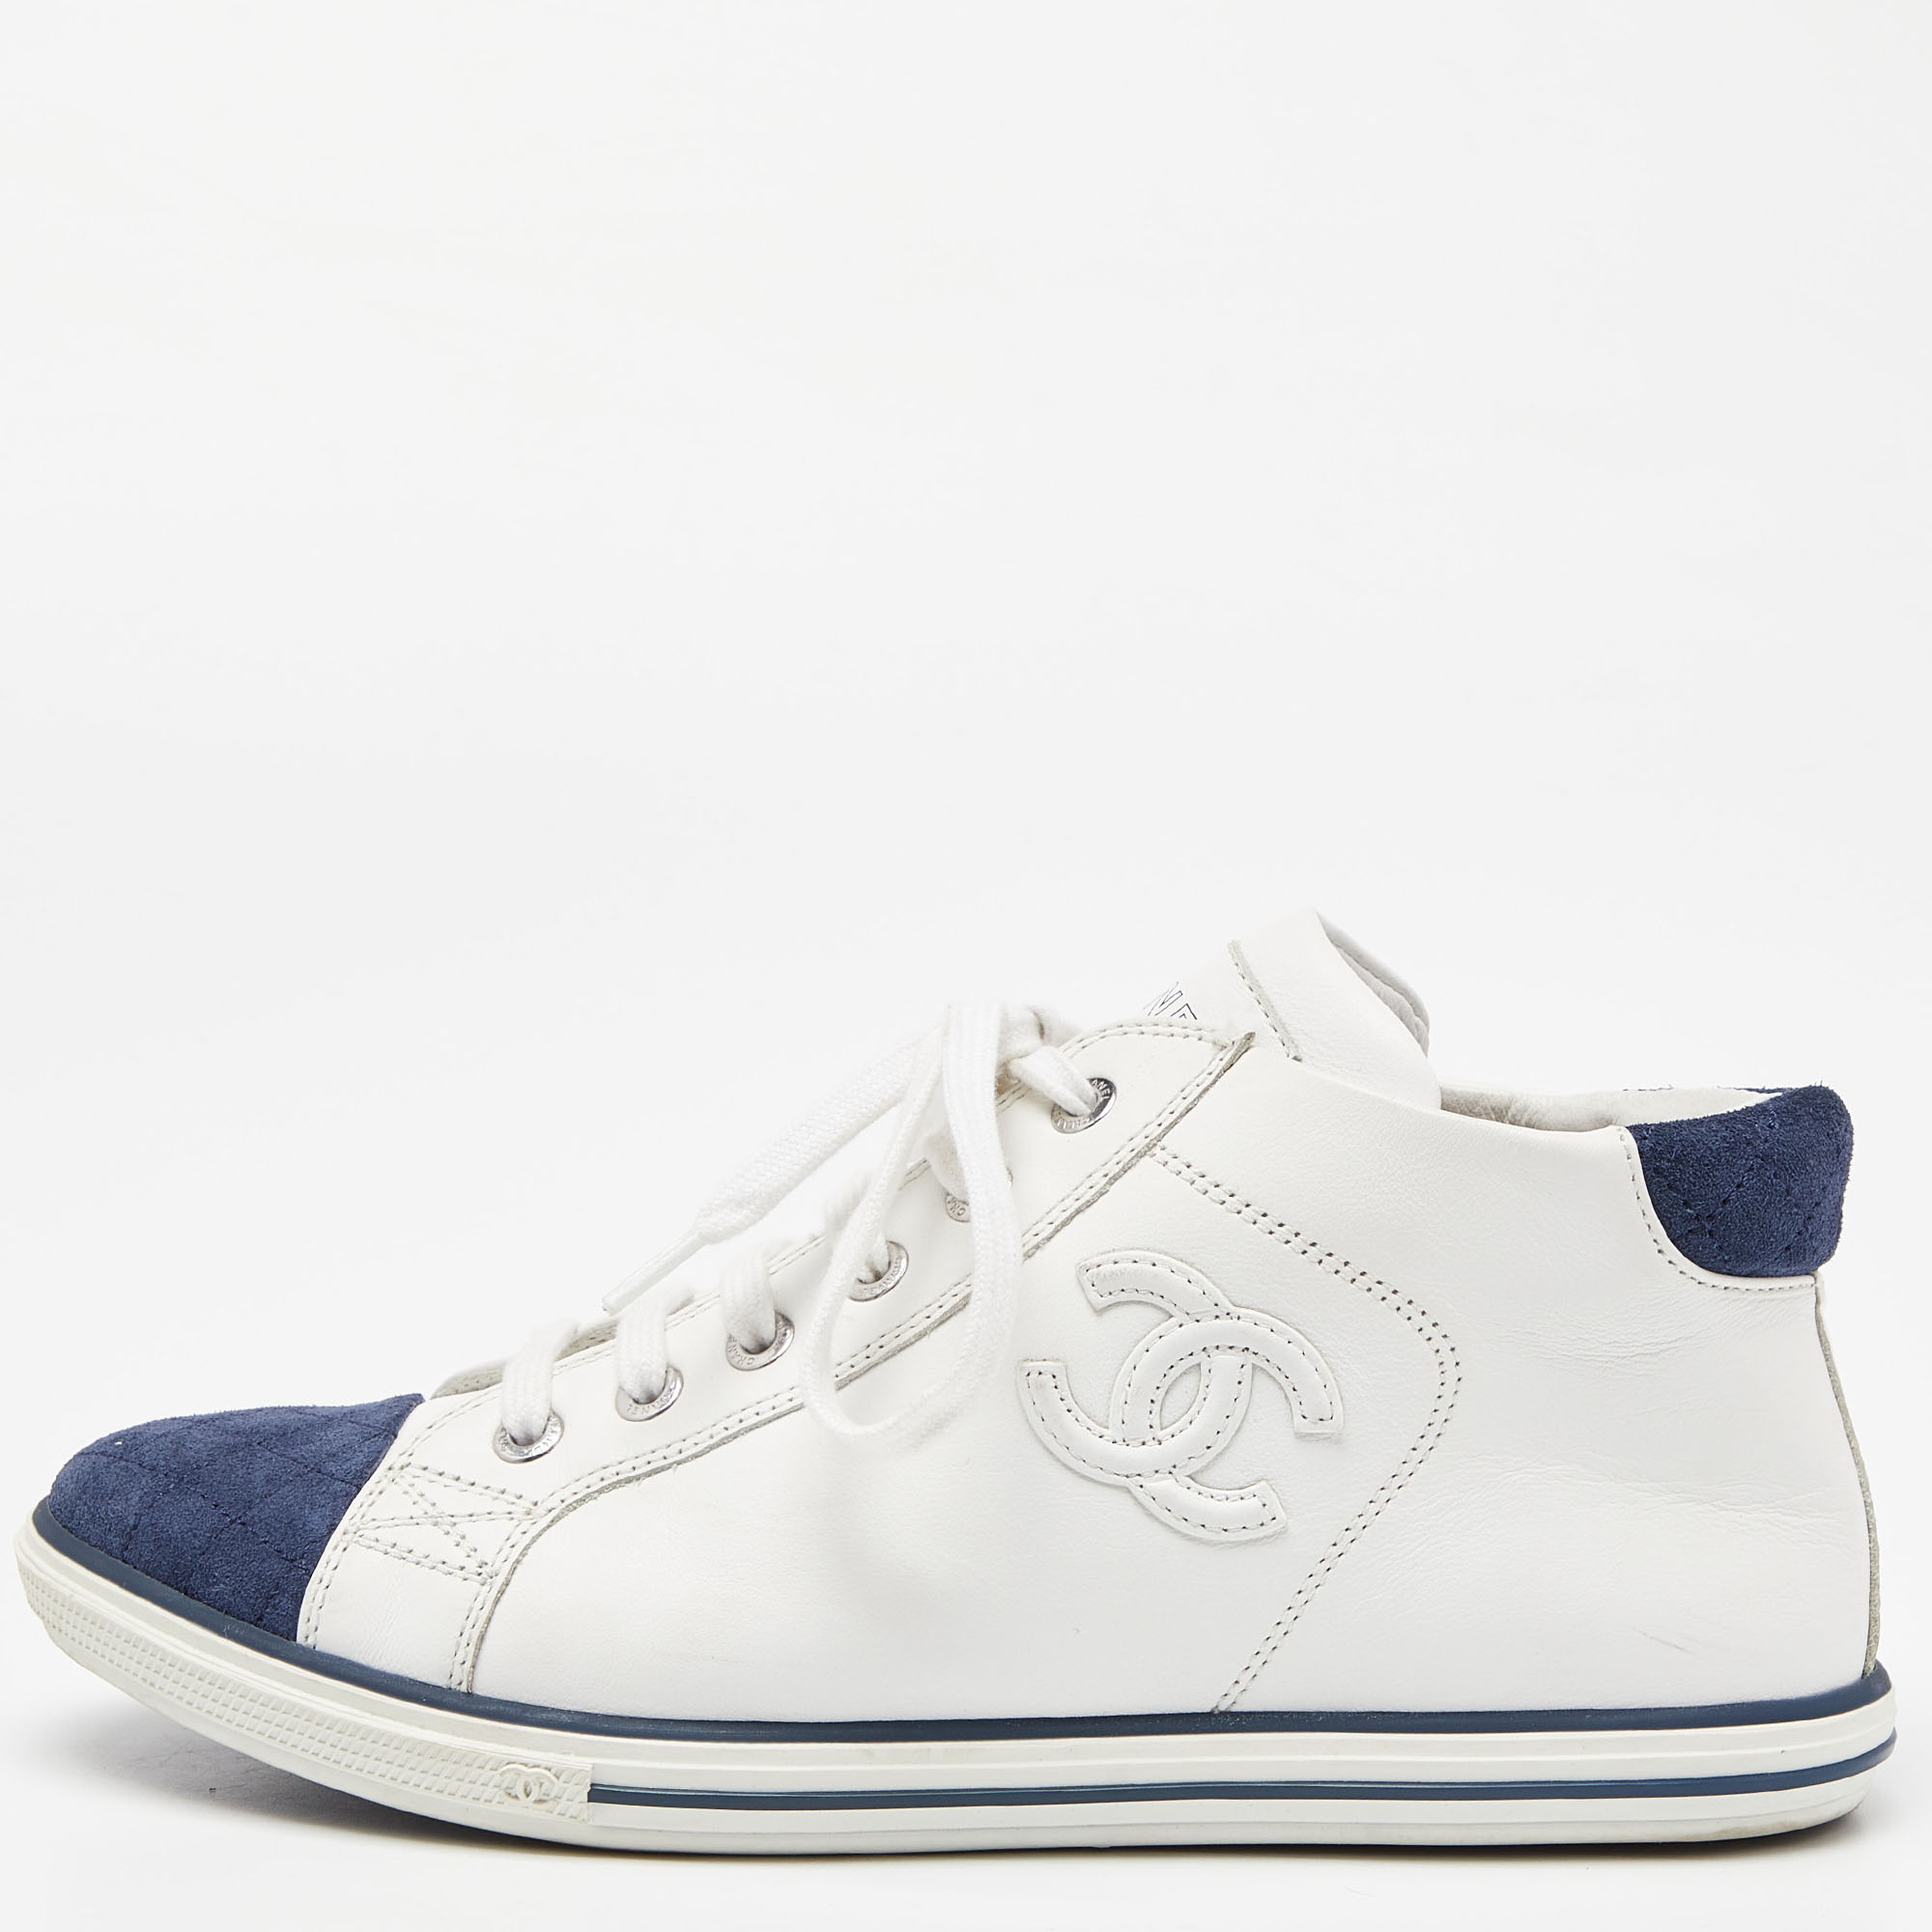 Chanel White/Blue Leather And Suede Lace Up High Top Sneakers Size 36